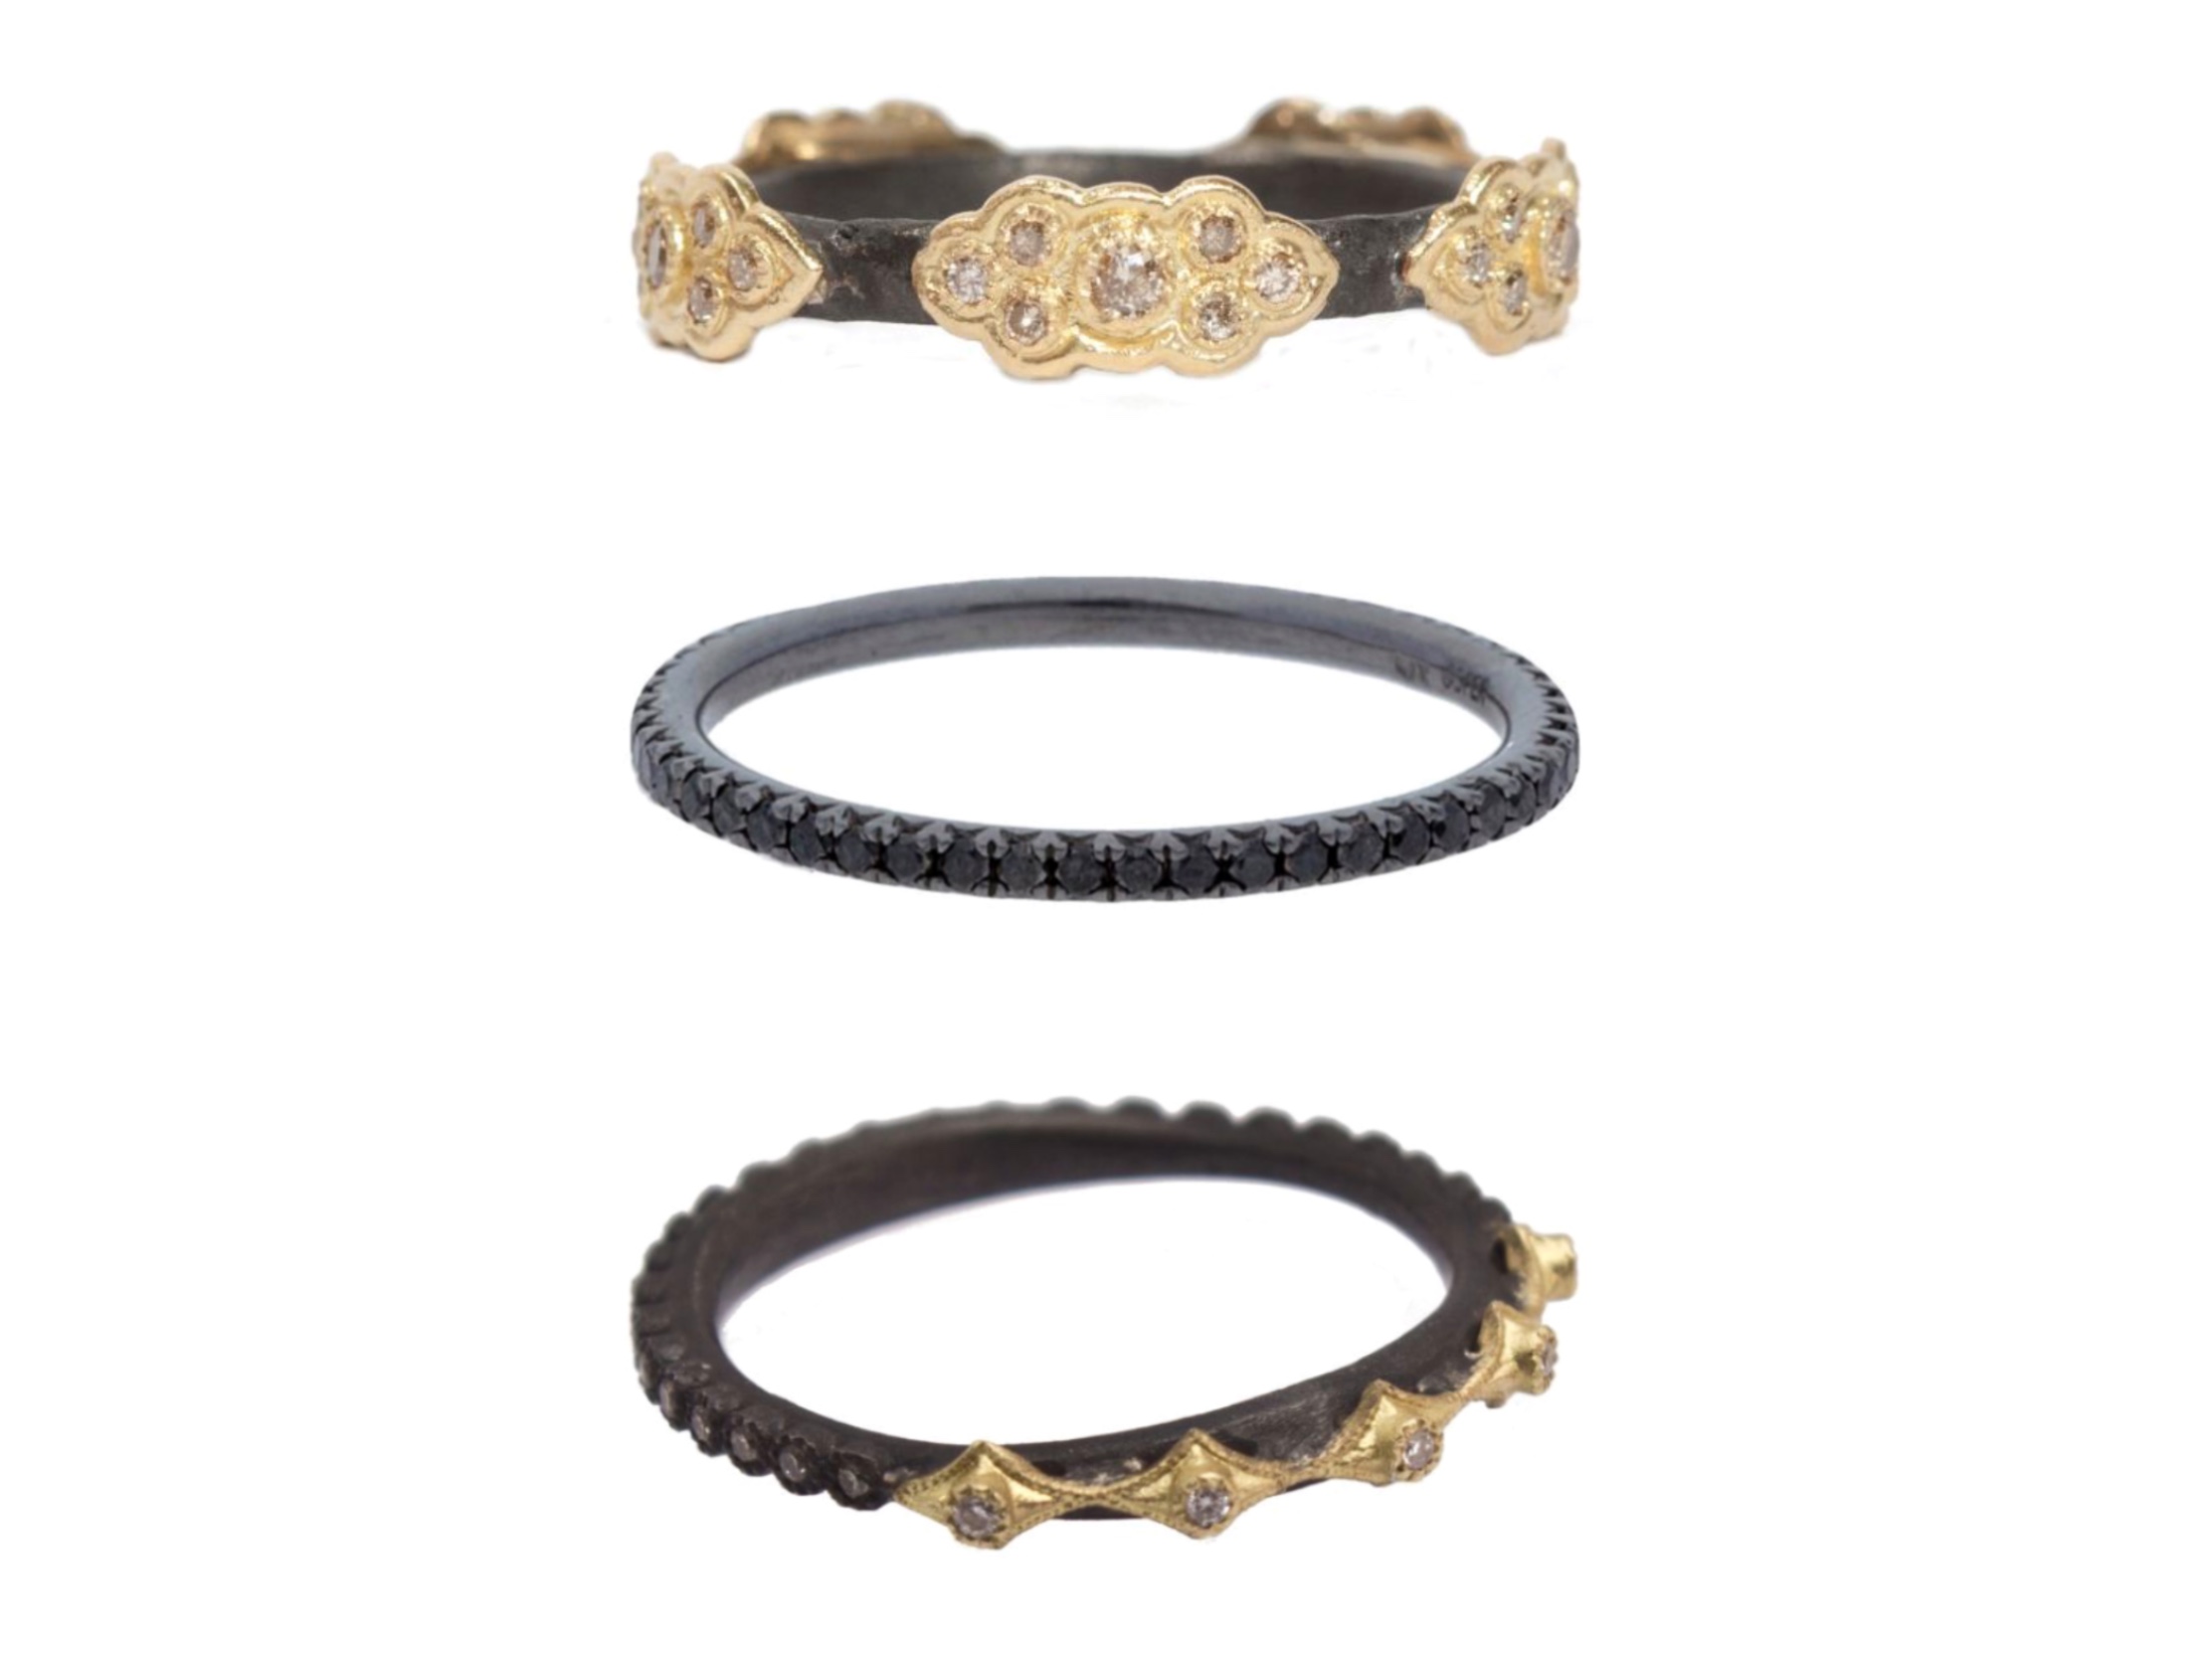 A stack of rings with darkened metal and patina. The bottom ring is the Old World Stack Band Ring With White And Champagne Diamond Crivelli Stations by Armenta, the center ring is Black Diamond Stackable Ring by Deutsch Signature, and the top band is the Old World Stack Band Ring With Champagne Diamond Scrolls by Armenta. All are available at Deutsch Fine Jewelry in Houston, Texas.